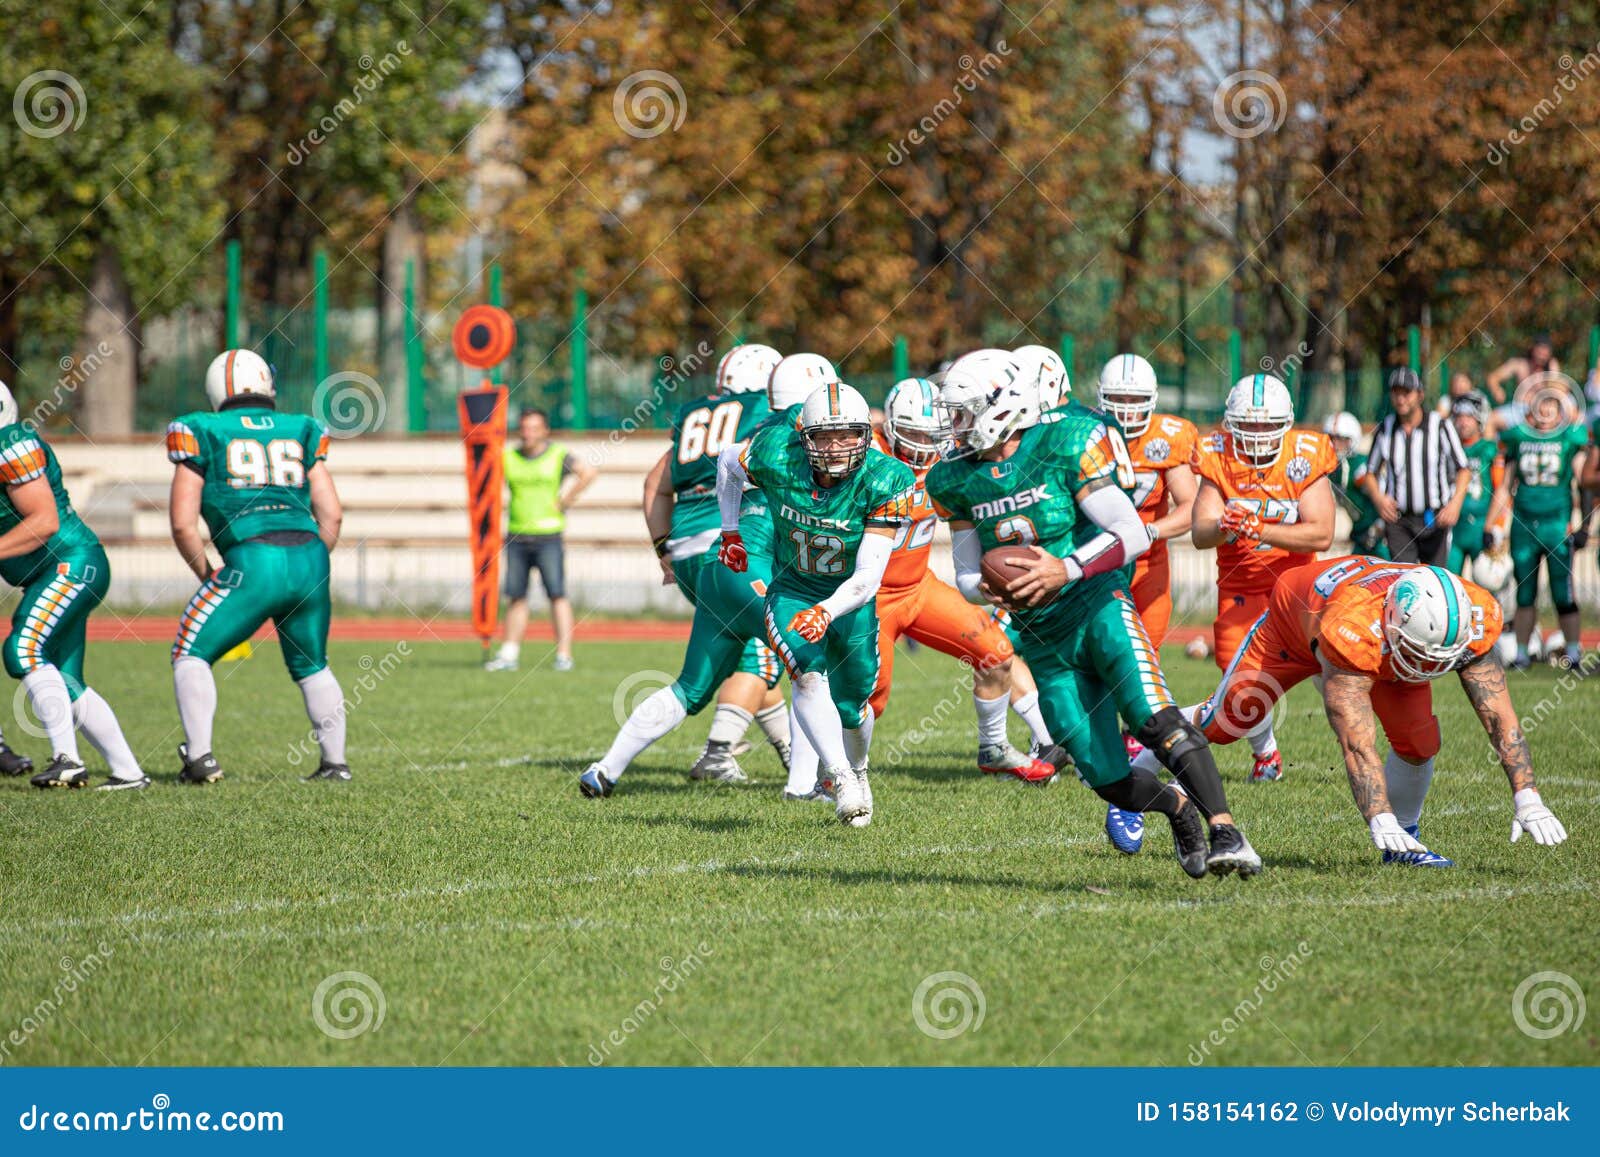 American Football Match in the Open Stadium Editorial Photography